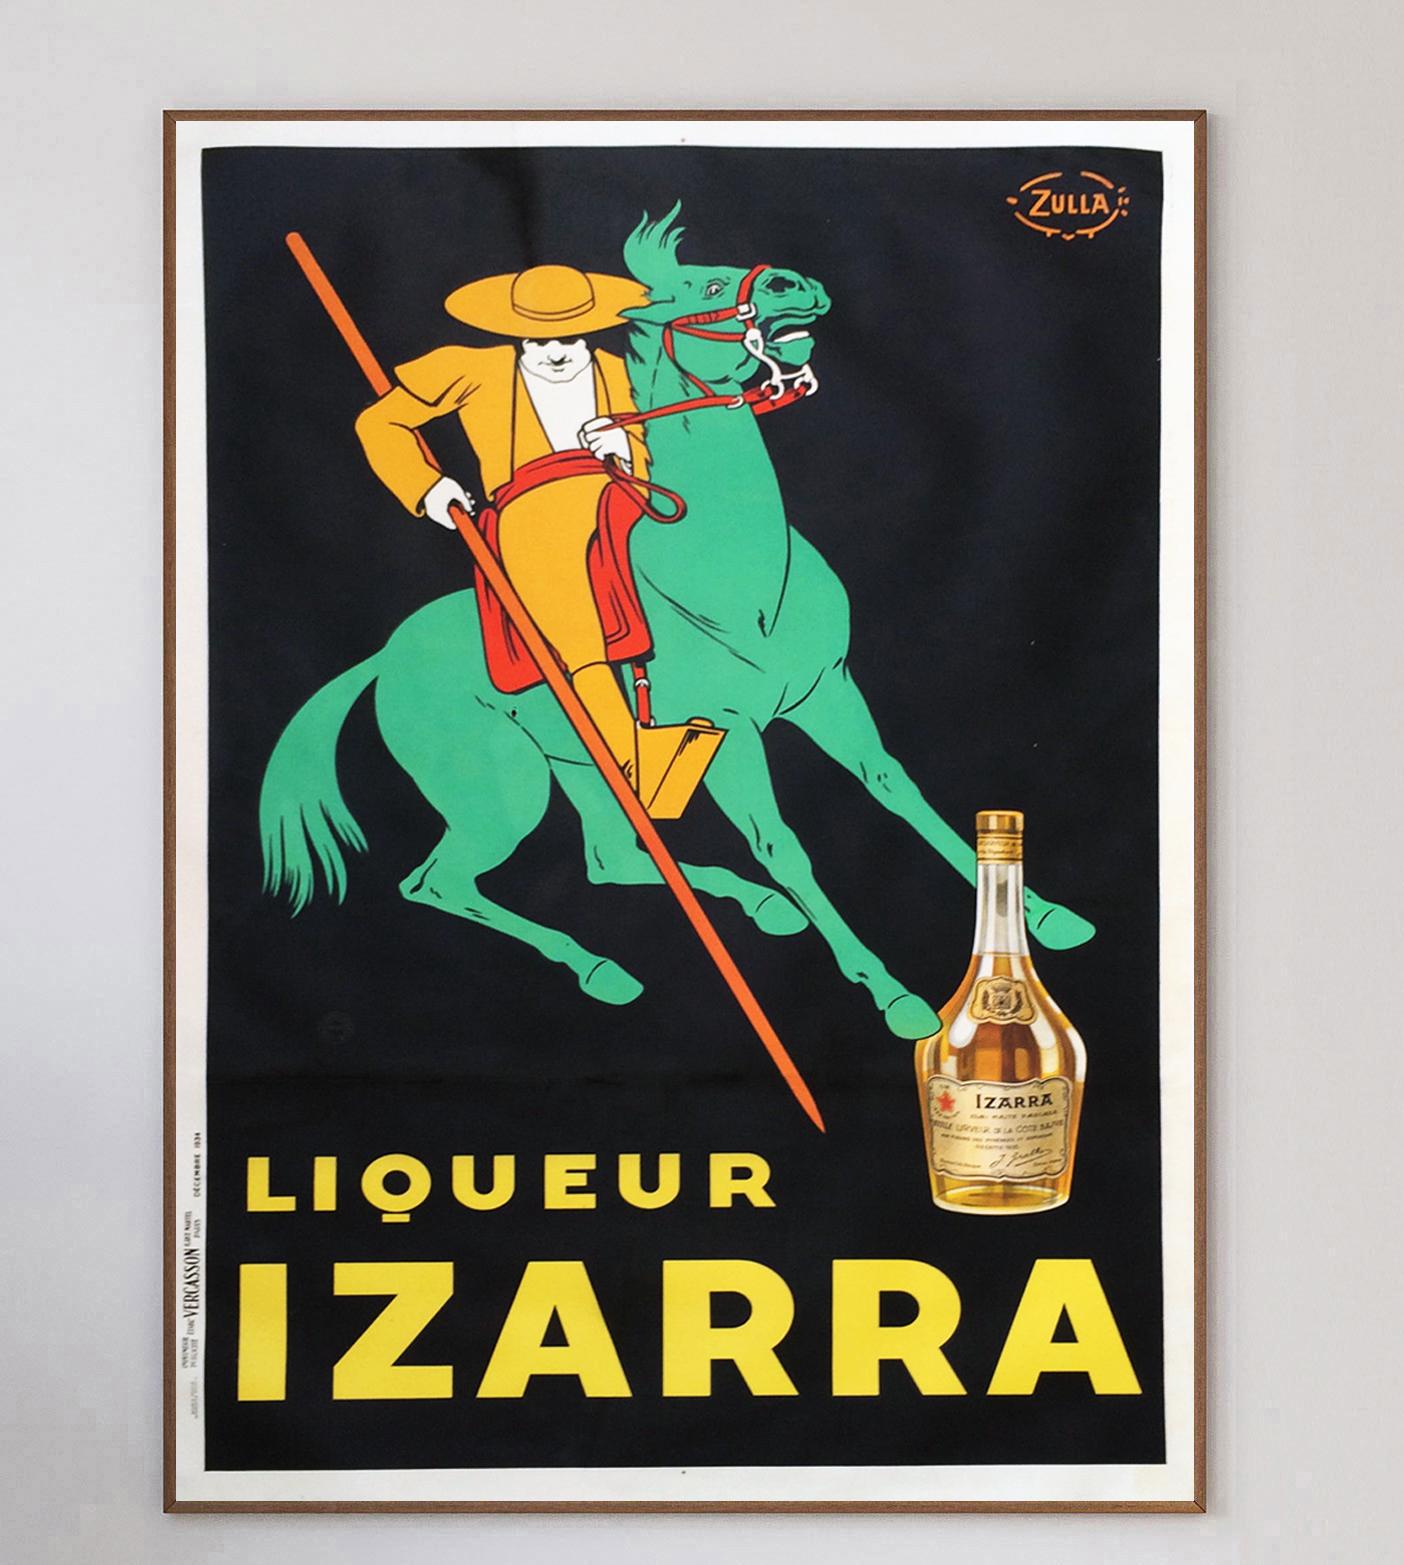 Hailing from the Basque region of France, Izarra Liqueur was founded in 1904 and continues to be sold worldwide today. Meaning 